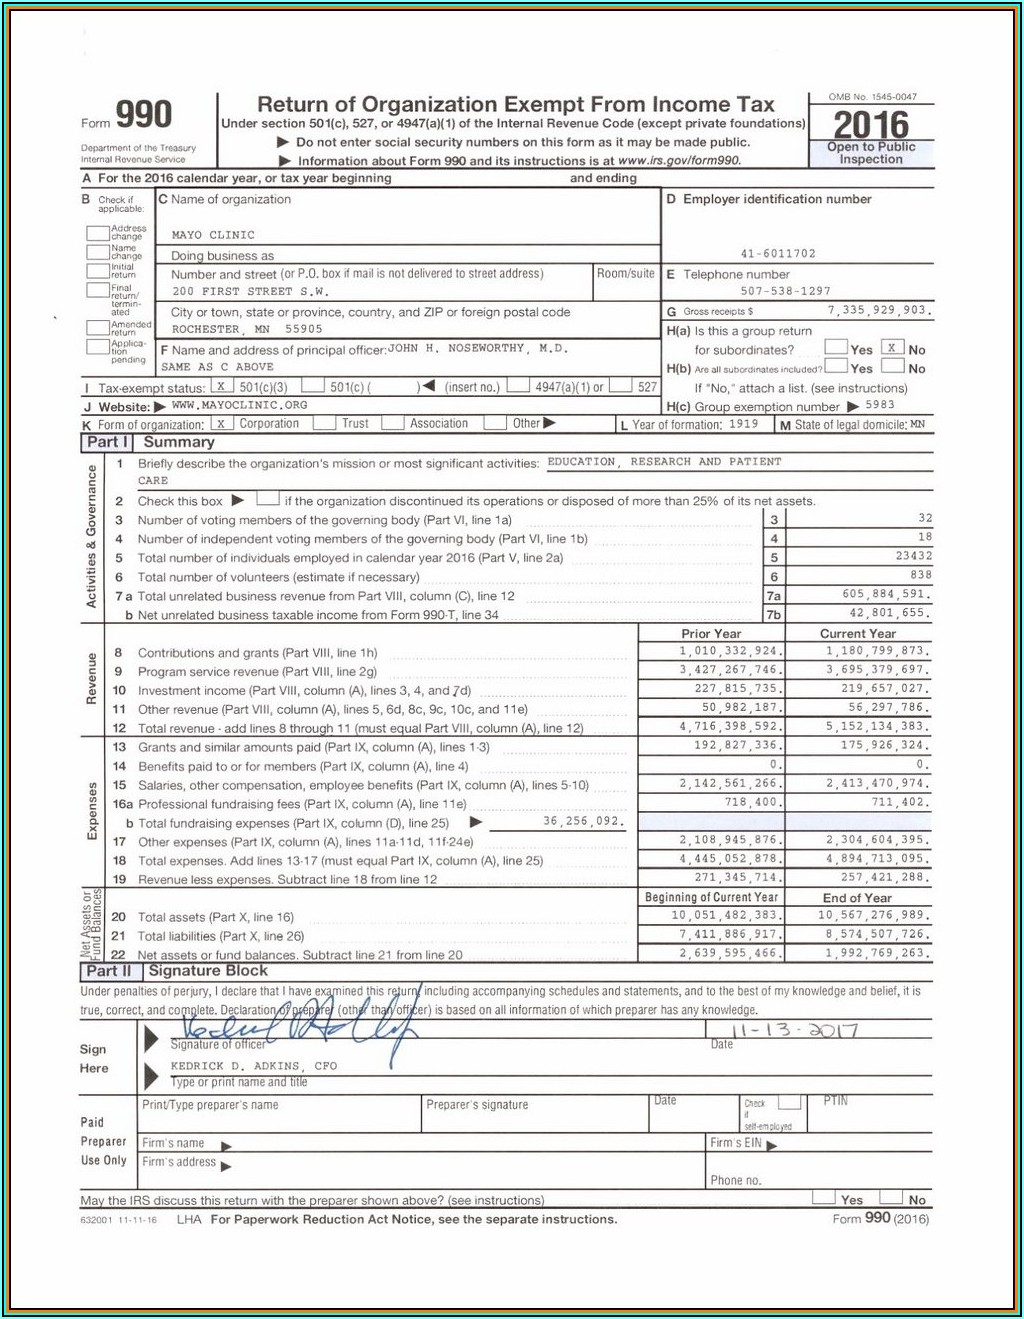 printable-irs-form-1040a-printable-forms-free-online